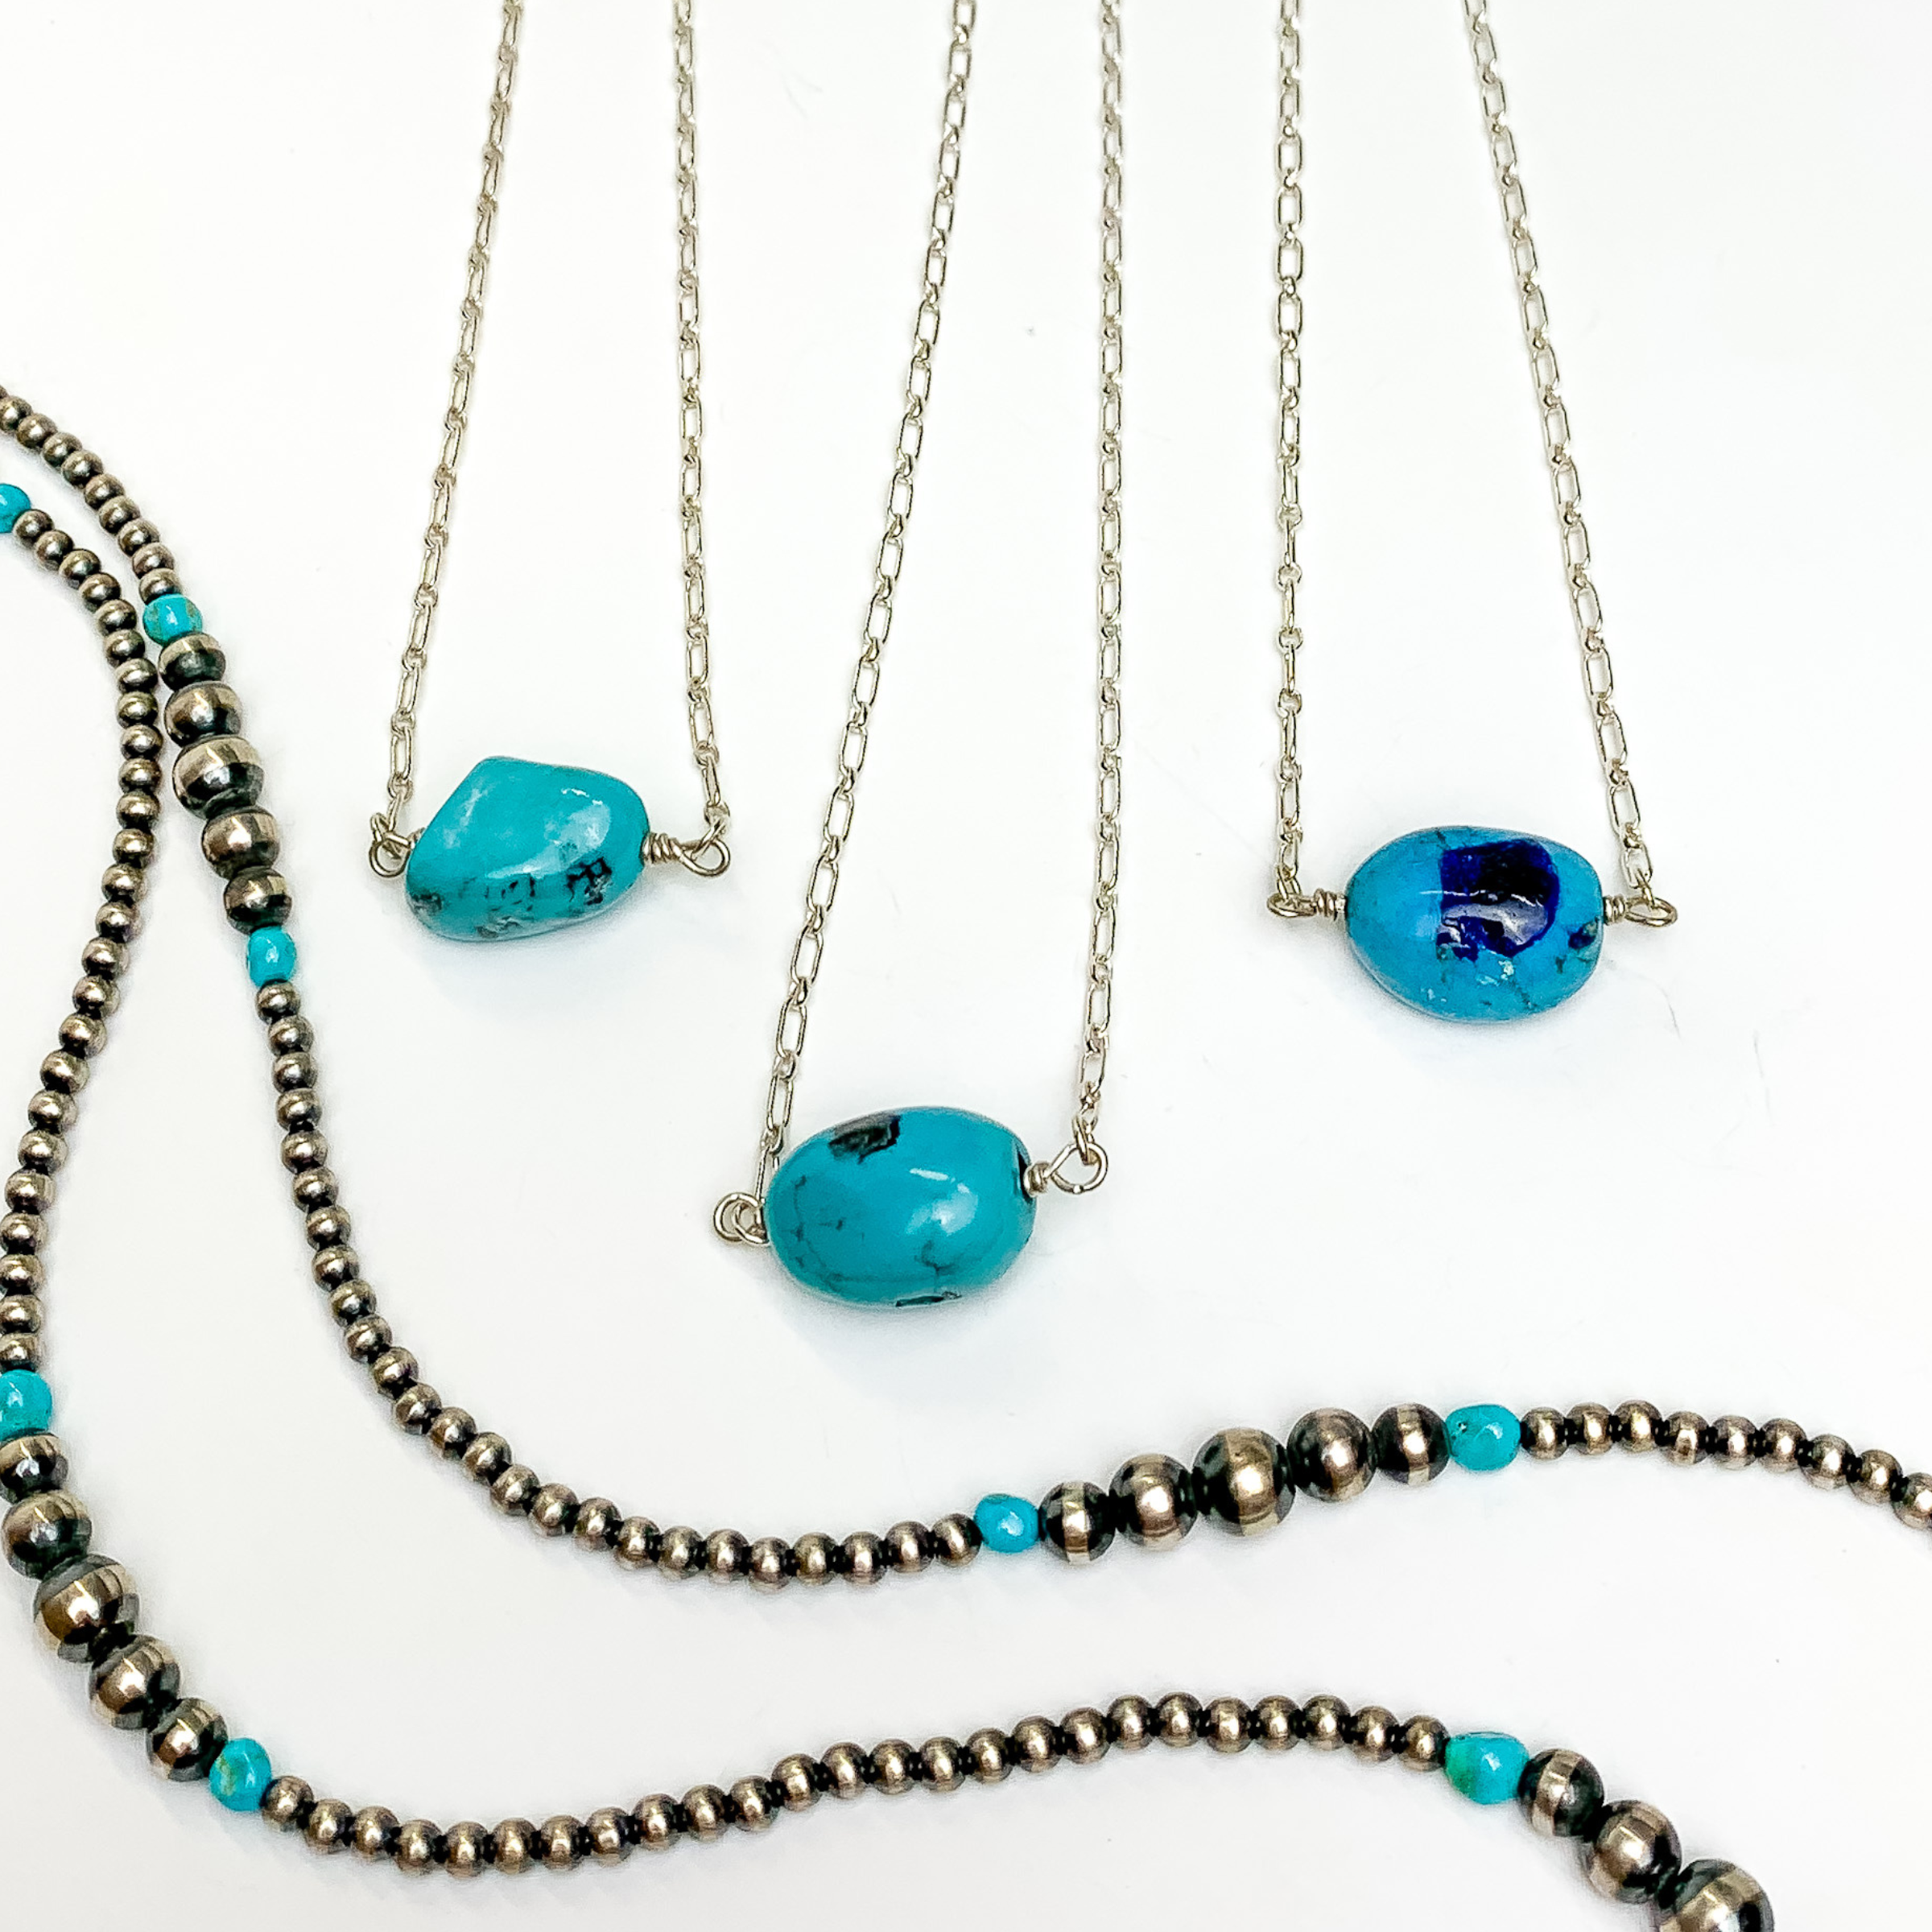 Navajo | Navajo Handmade Small Turquoise Chunk Stone on Silver Chain Necklace - Giddy Up Glamour Boutique